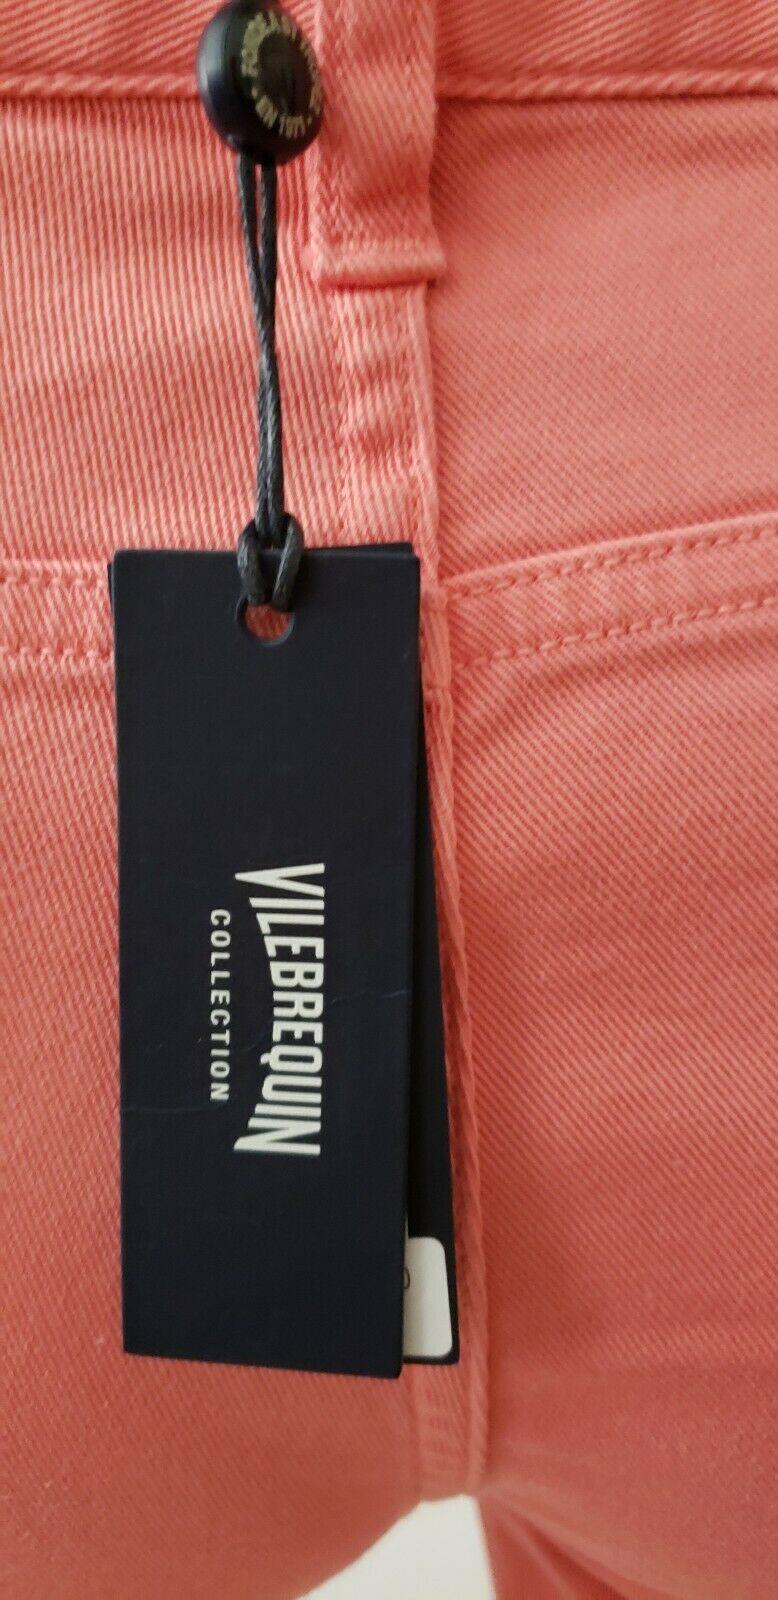 VILEBREQUIN  Men's Classic Slim Straight Fit Jeans Coral  Size 50 - SVNYFancy